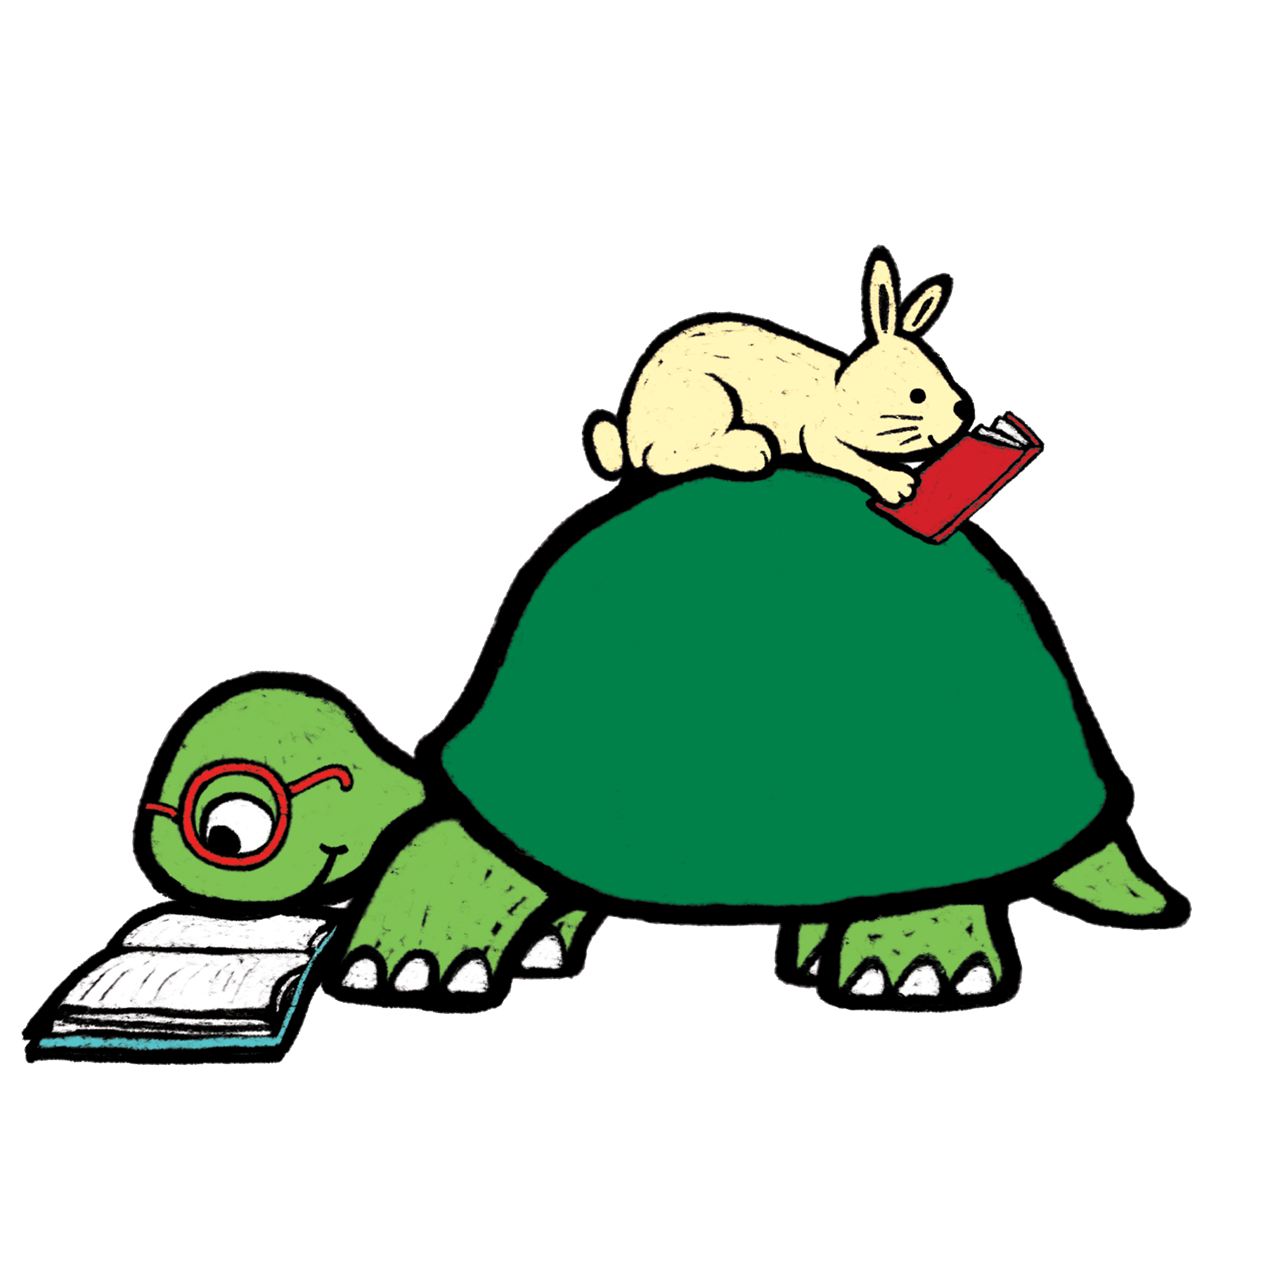 Tortoise and hare reading